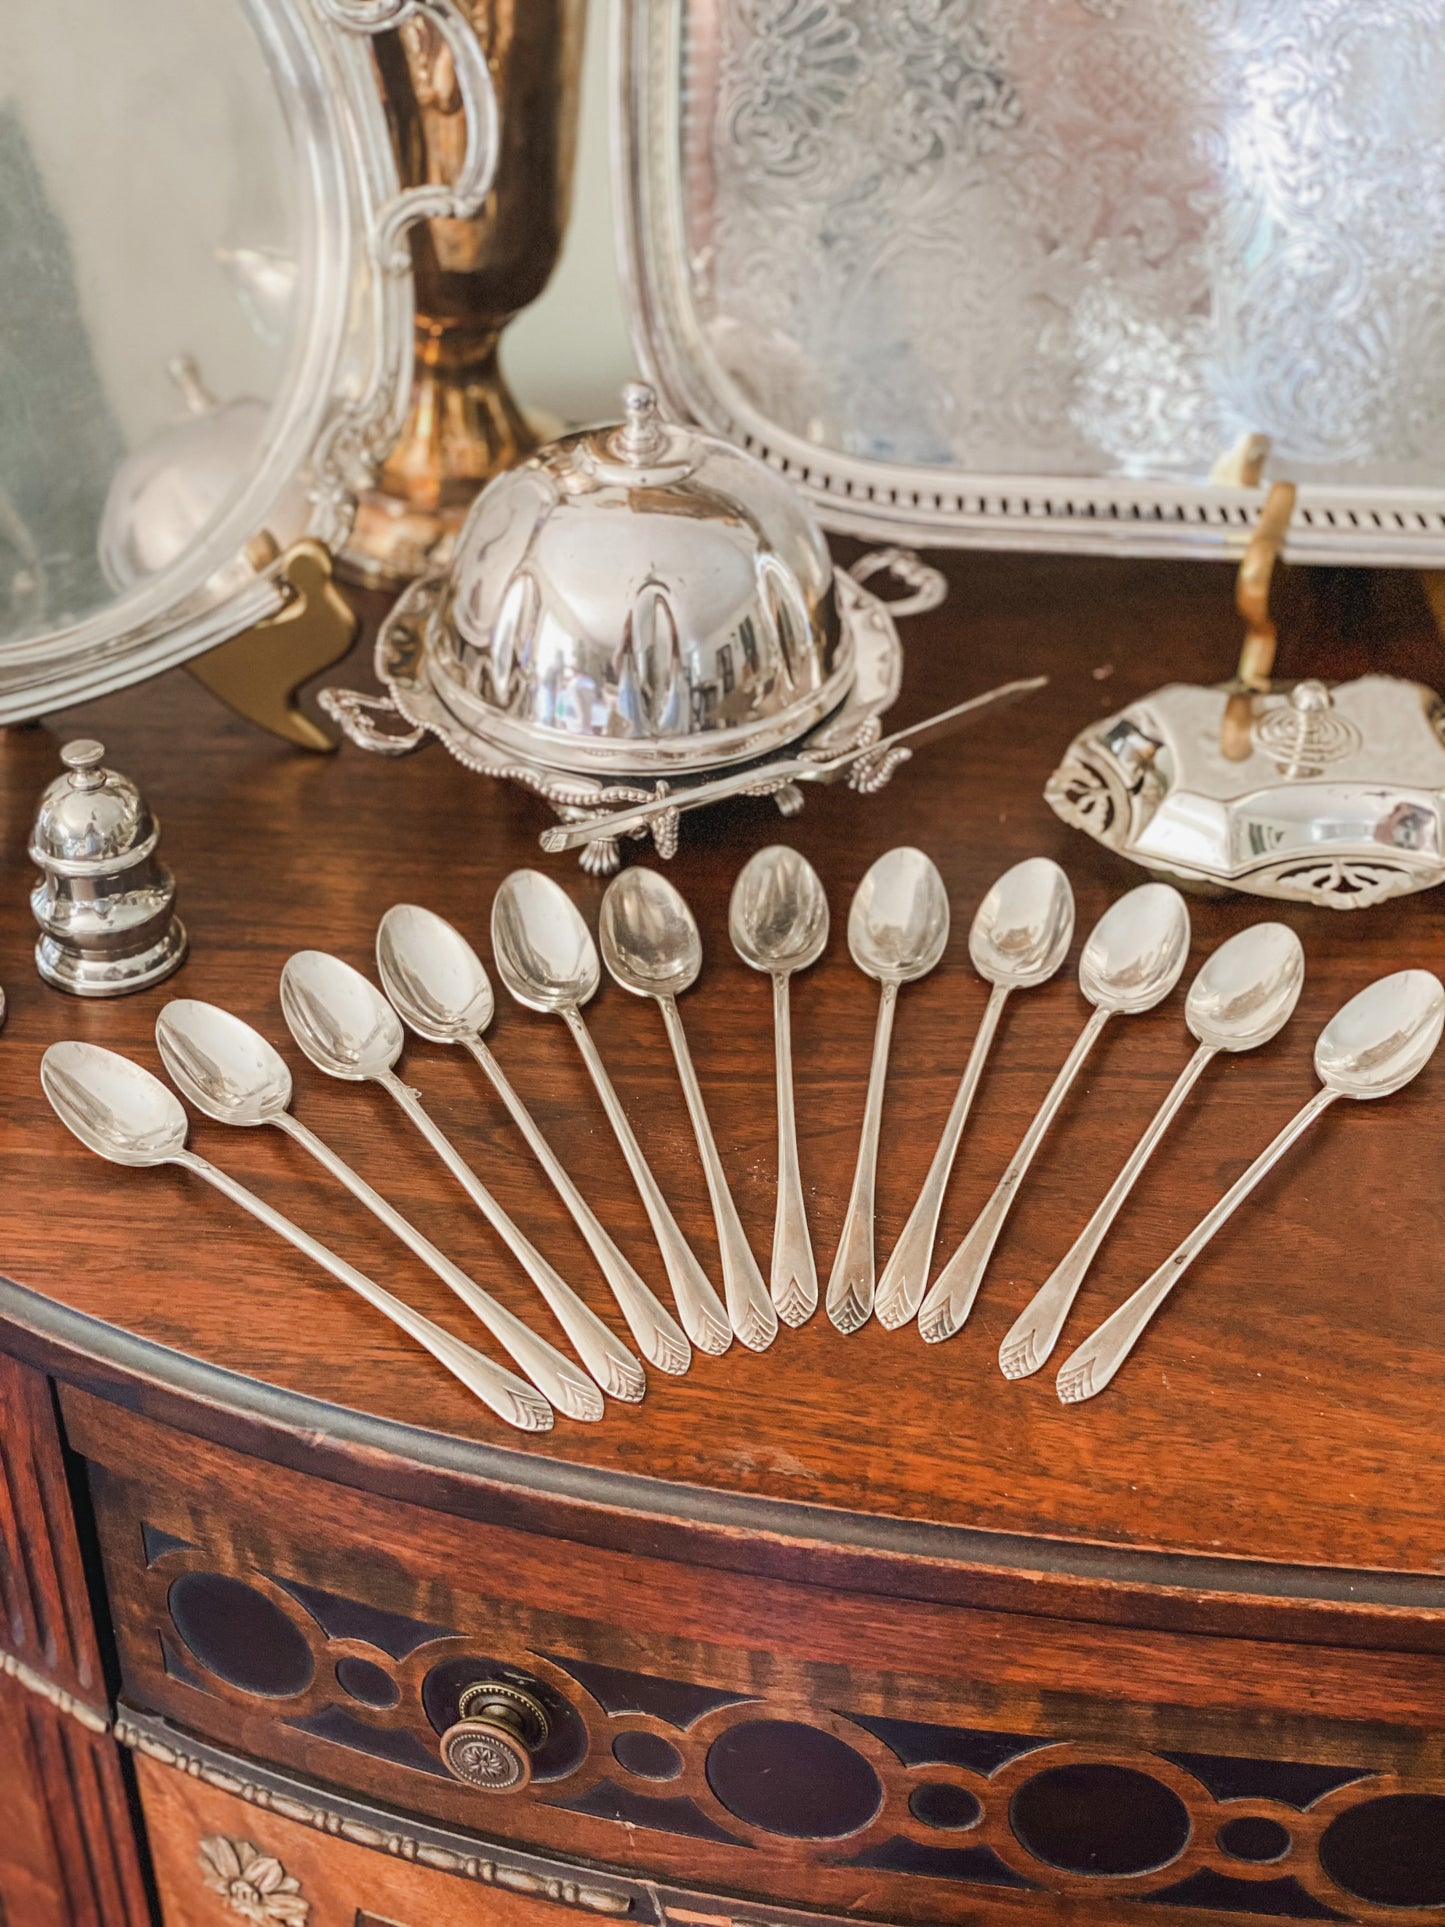 Set of 12 Iced Tea Spoons Made in 1934